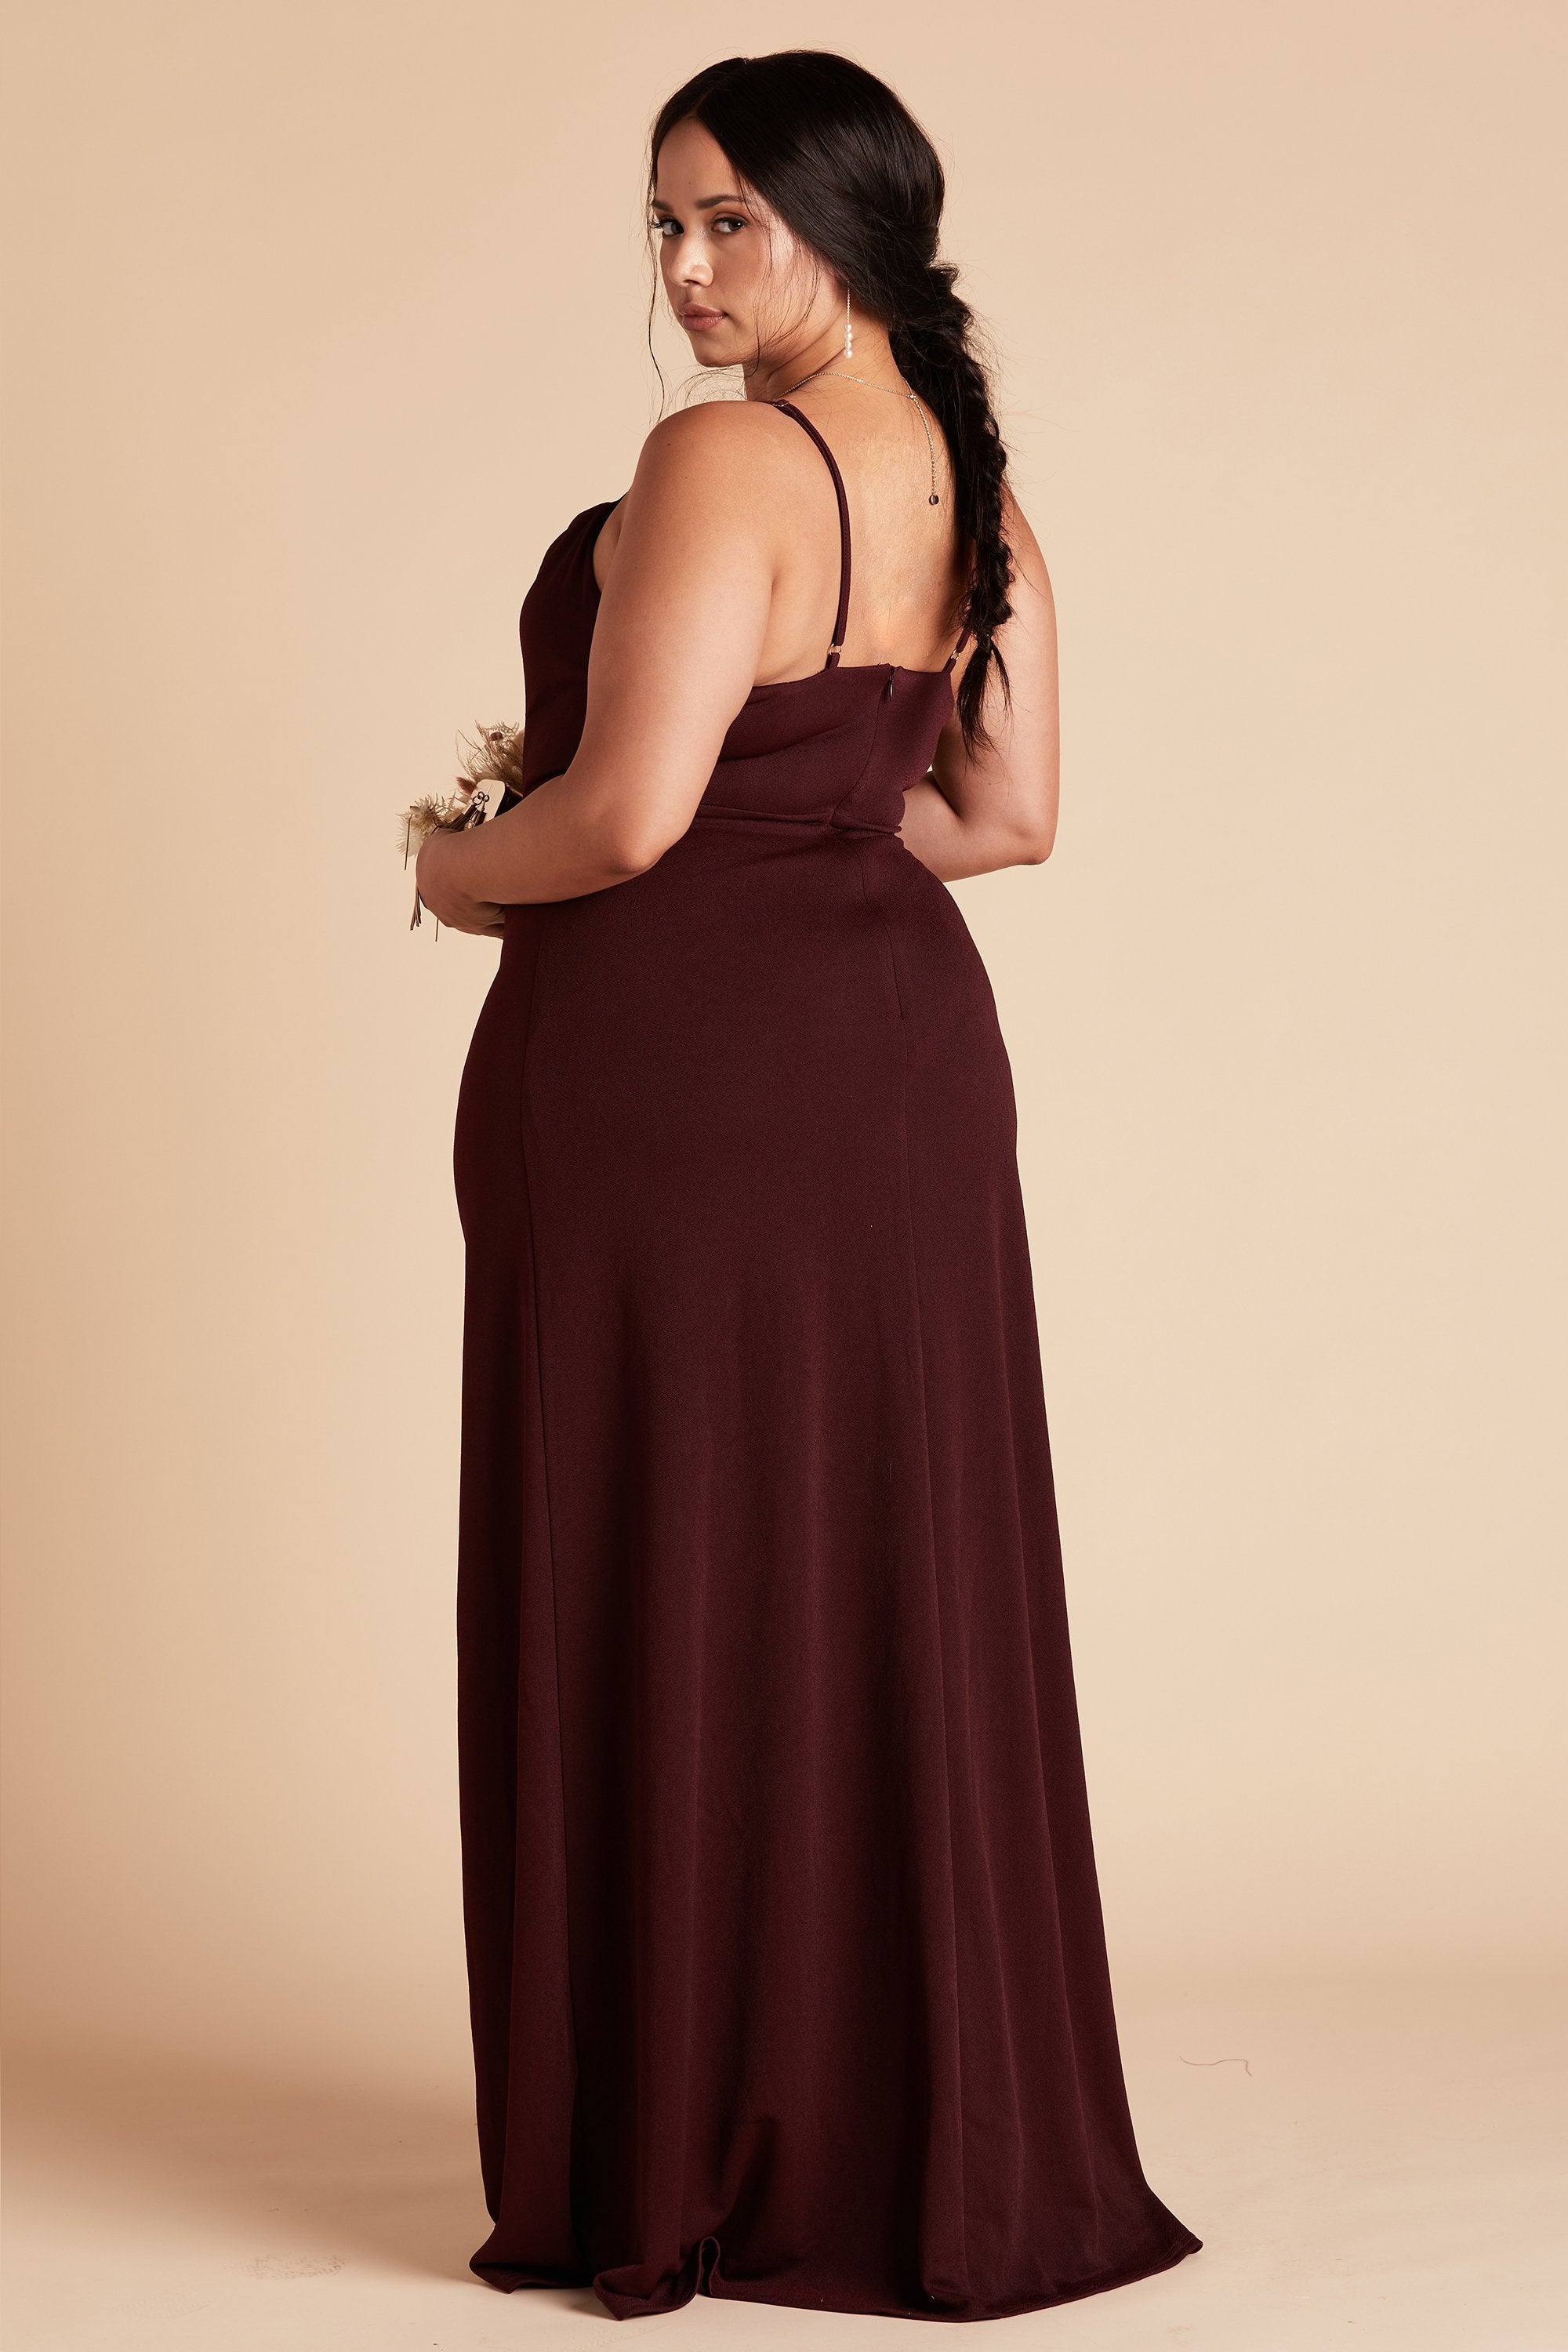 Ash plus size bridesmaid dress in cabernet burgundy crepe by Birdy Grey, side view